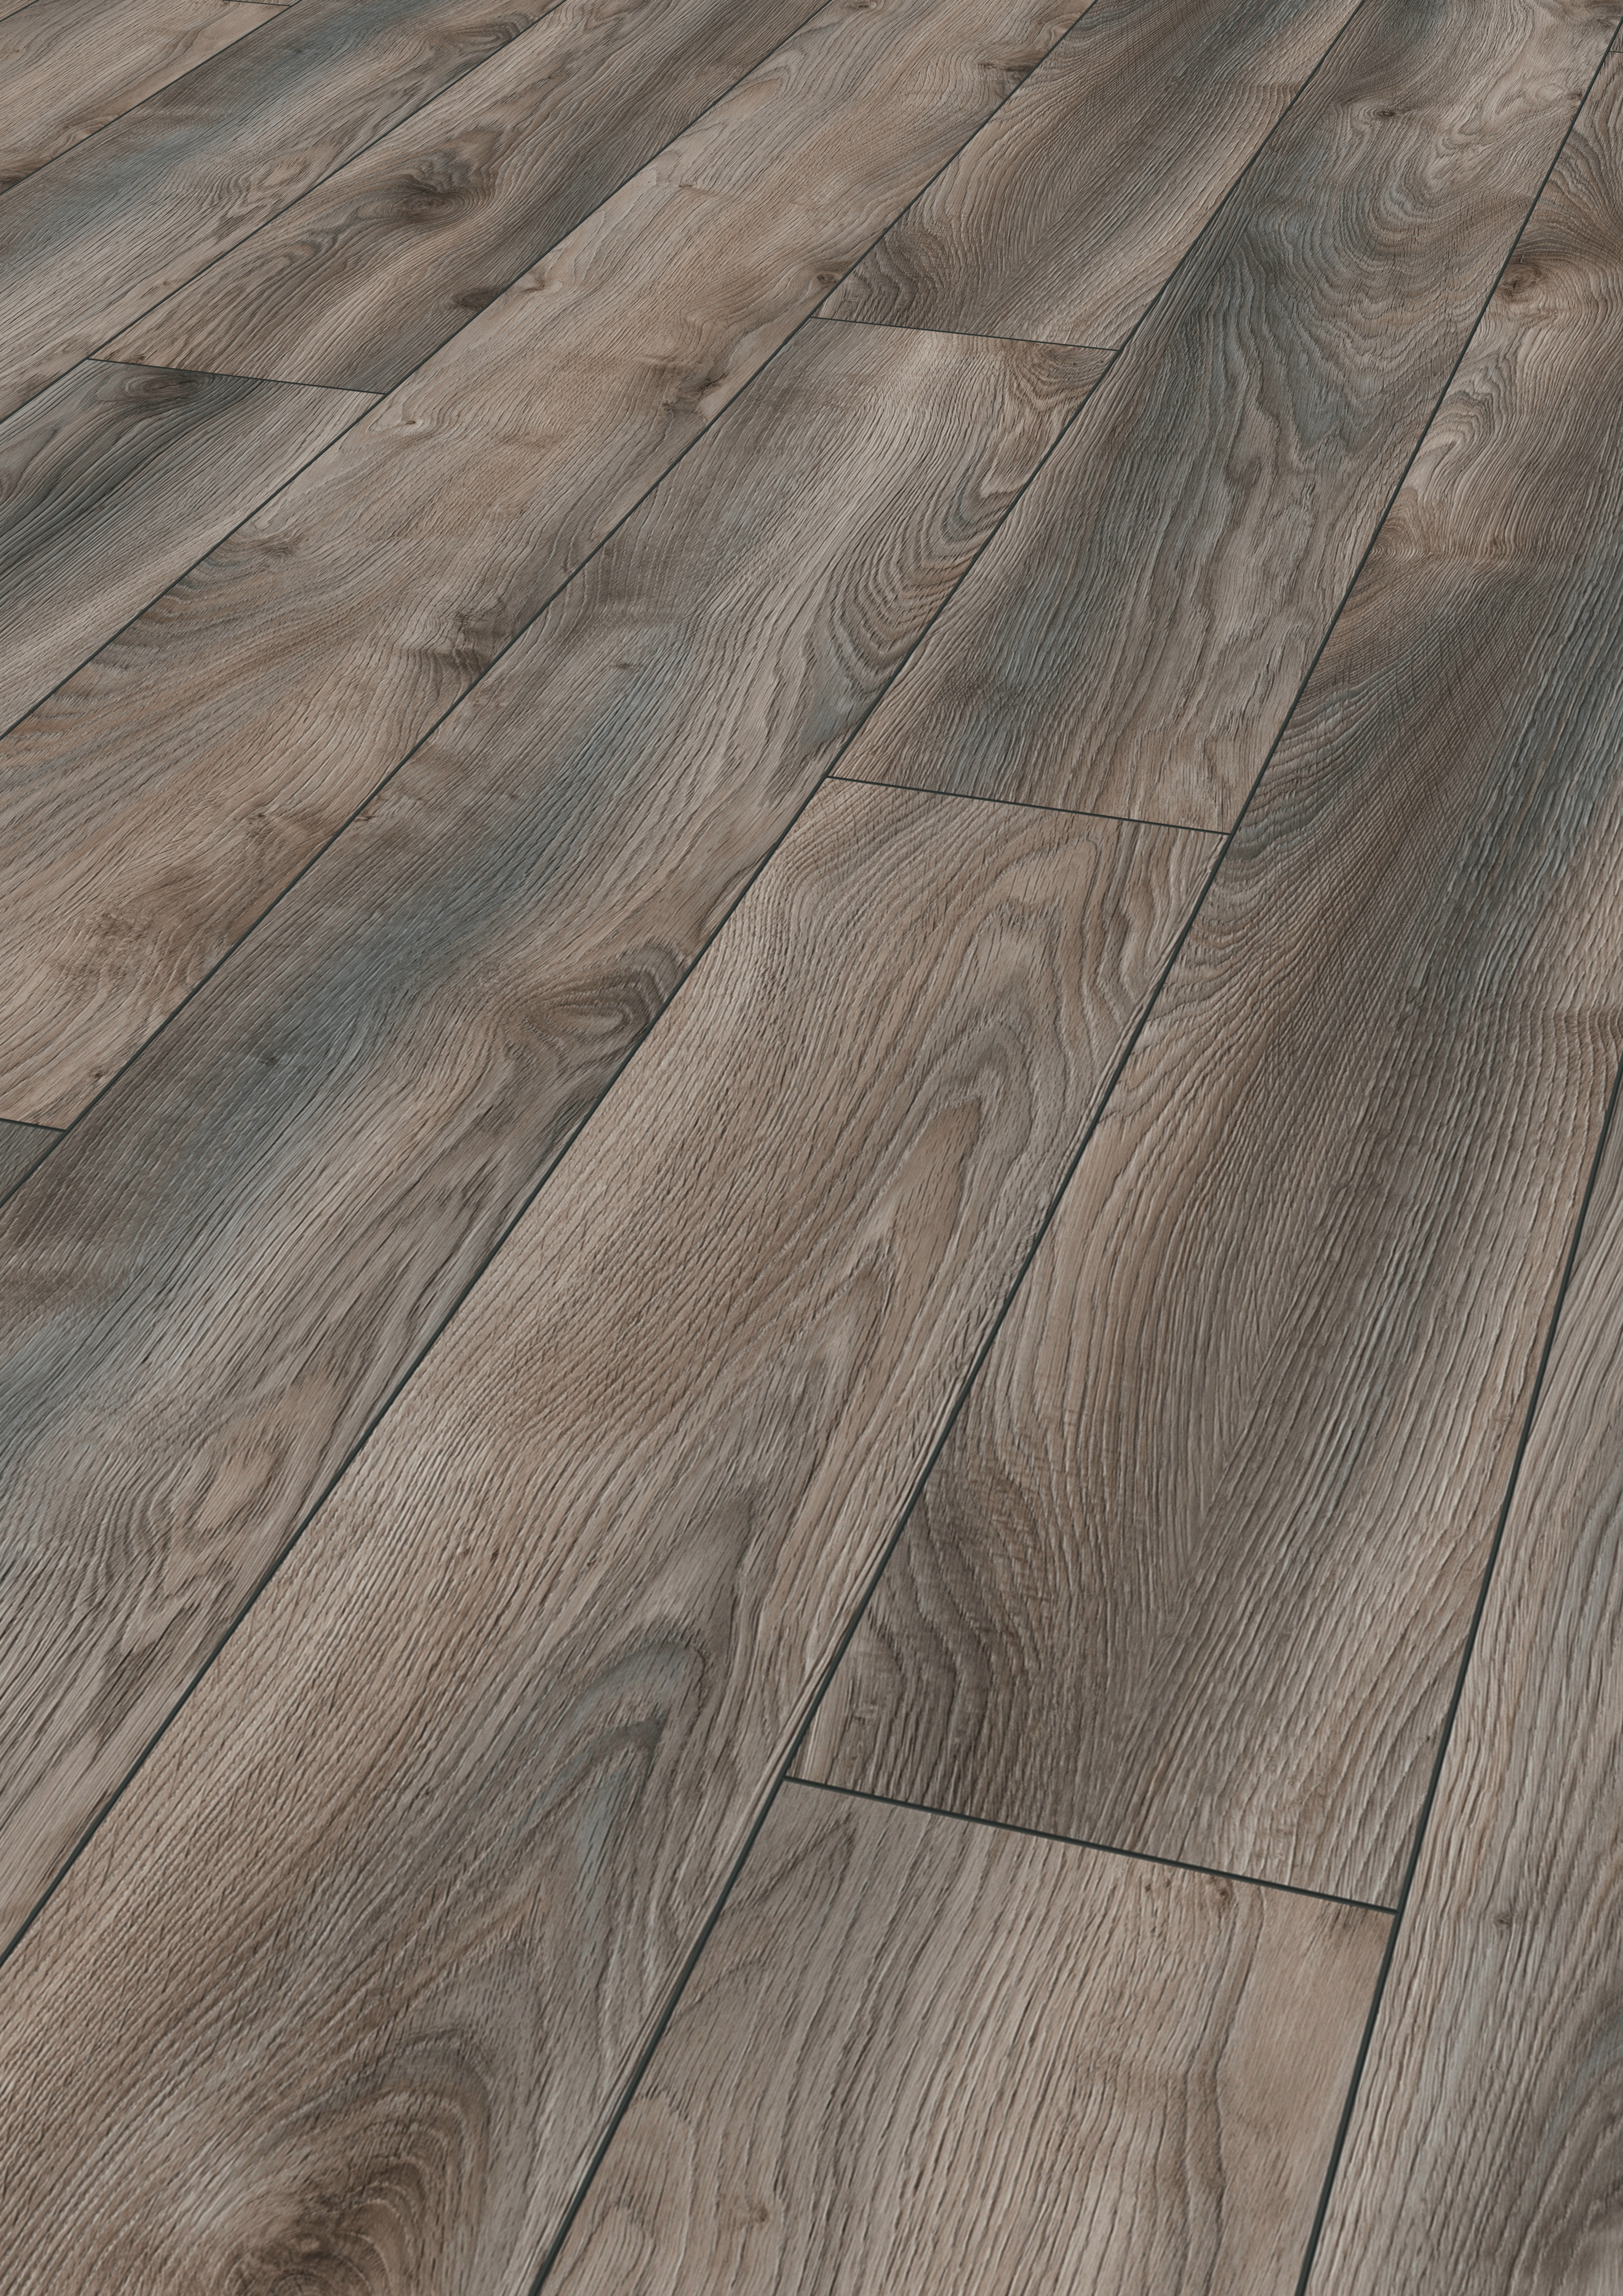 Impressions Hardwood Flooring Reviews Of Mammut Laminate Flooring In Country House Plank Style Kronotex In Download Picture Amp